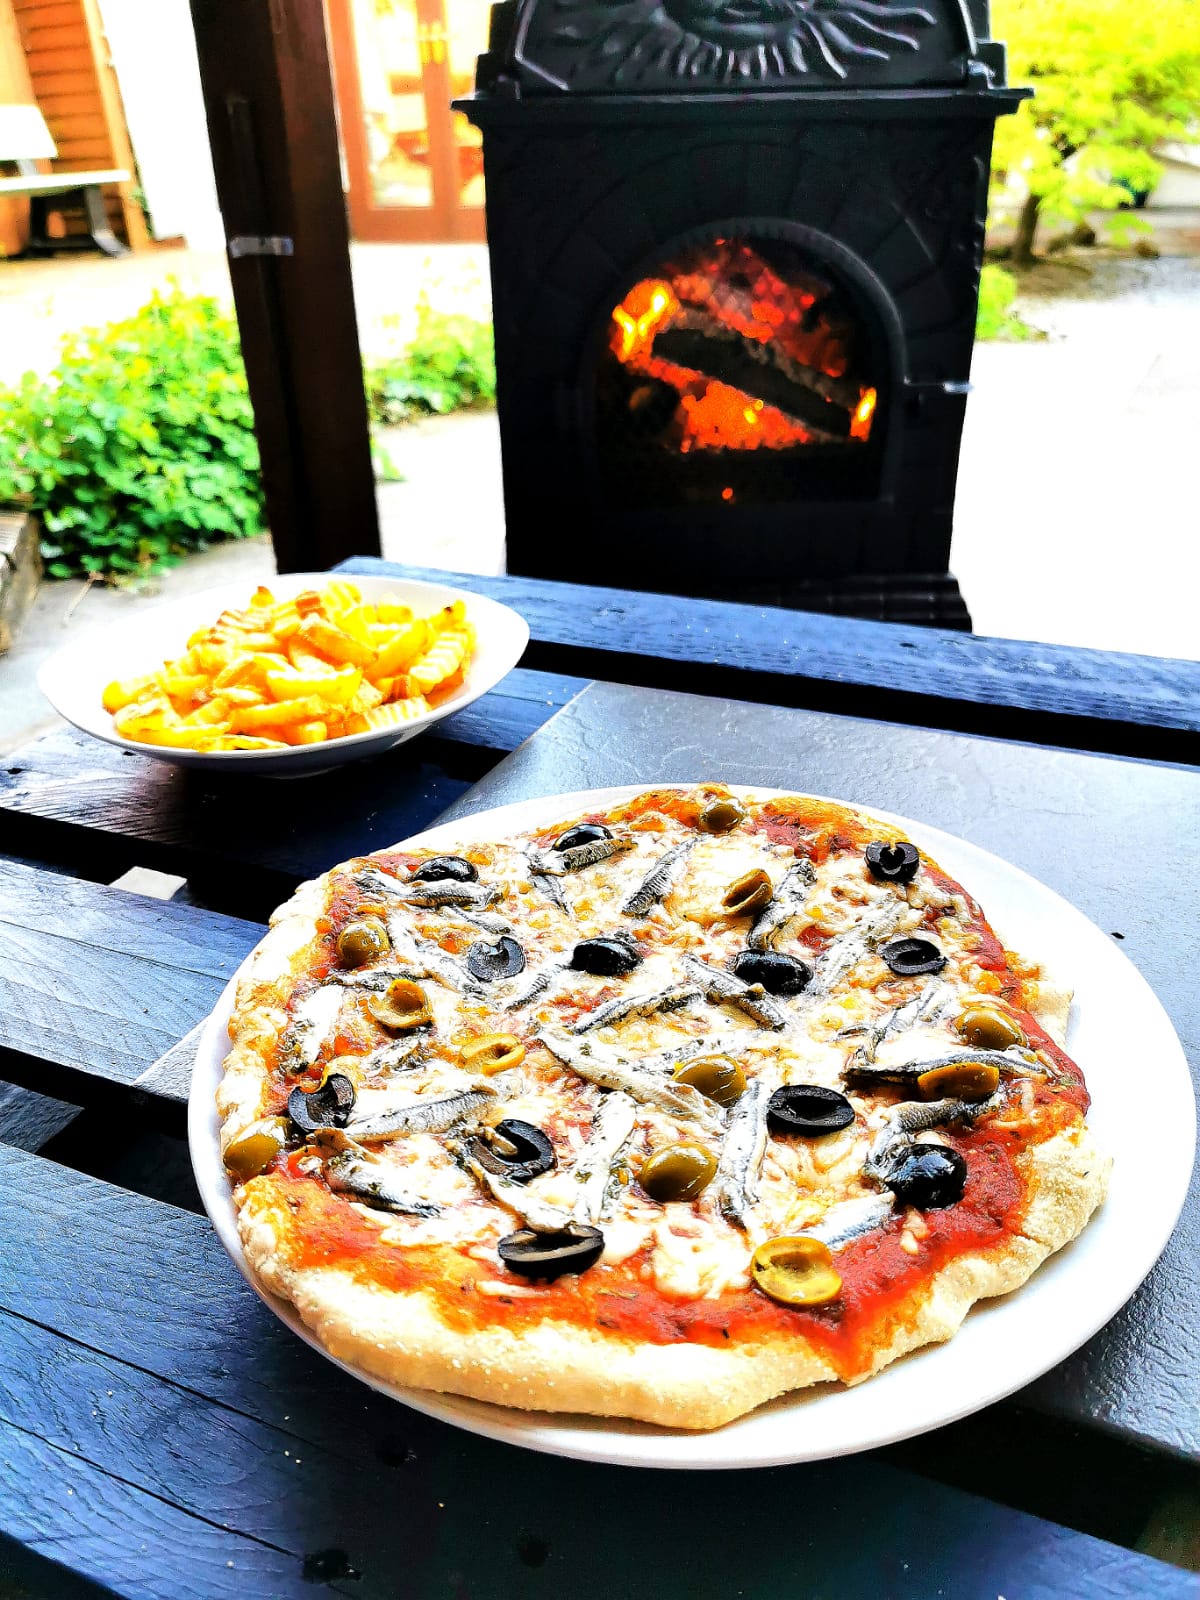 Mushroom pizza in front of a wood burning stove